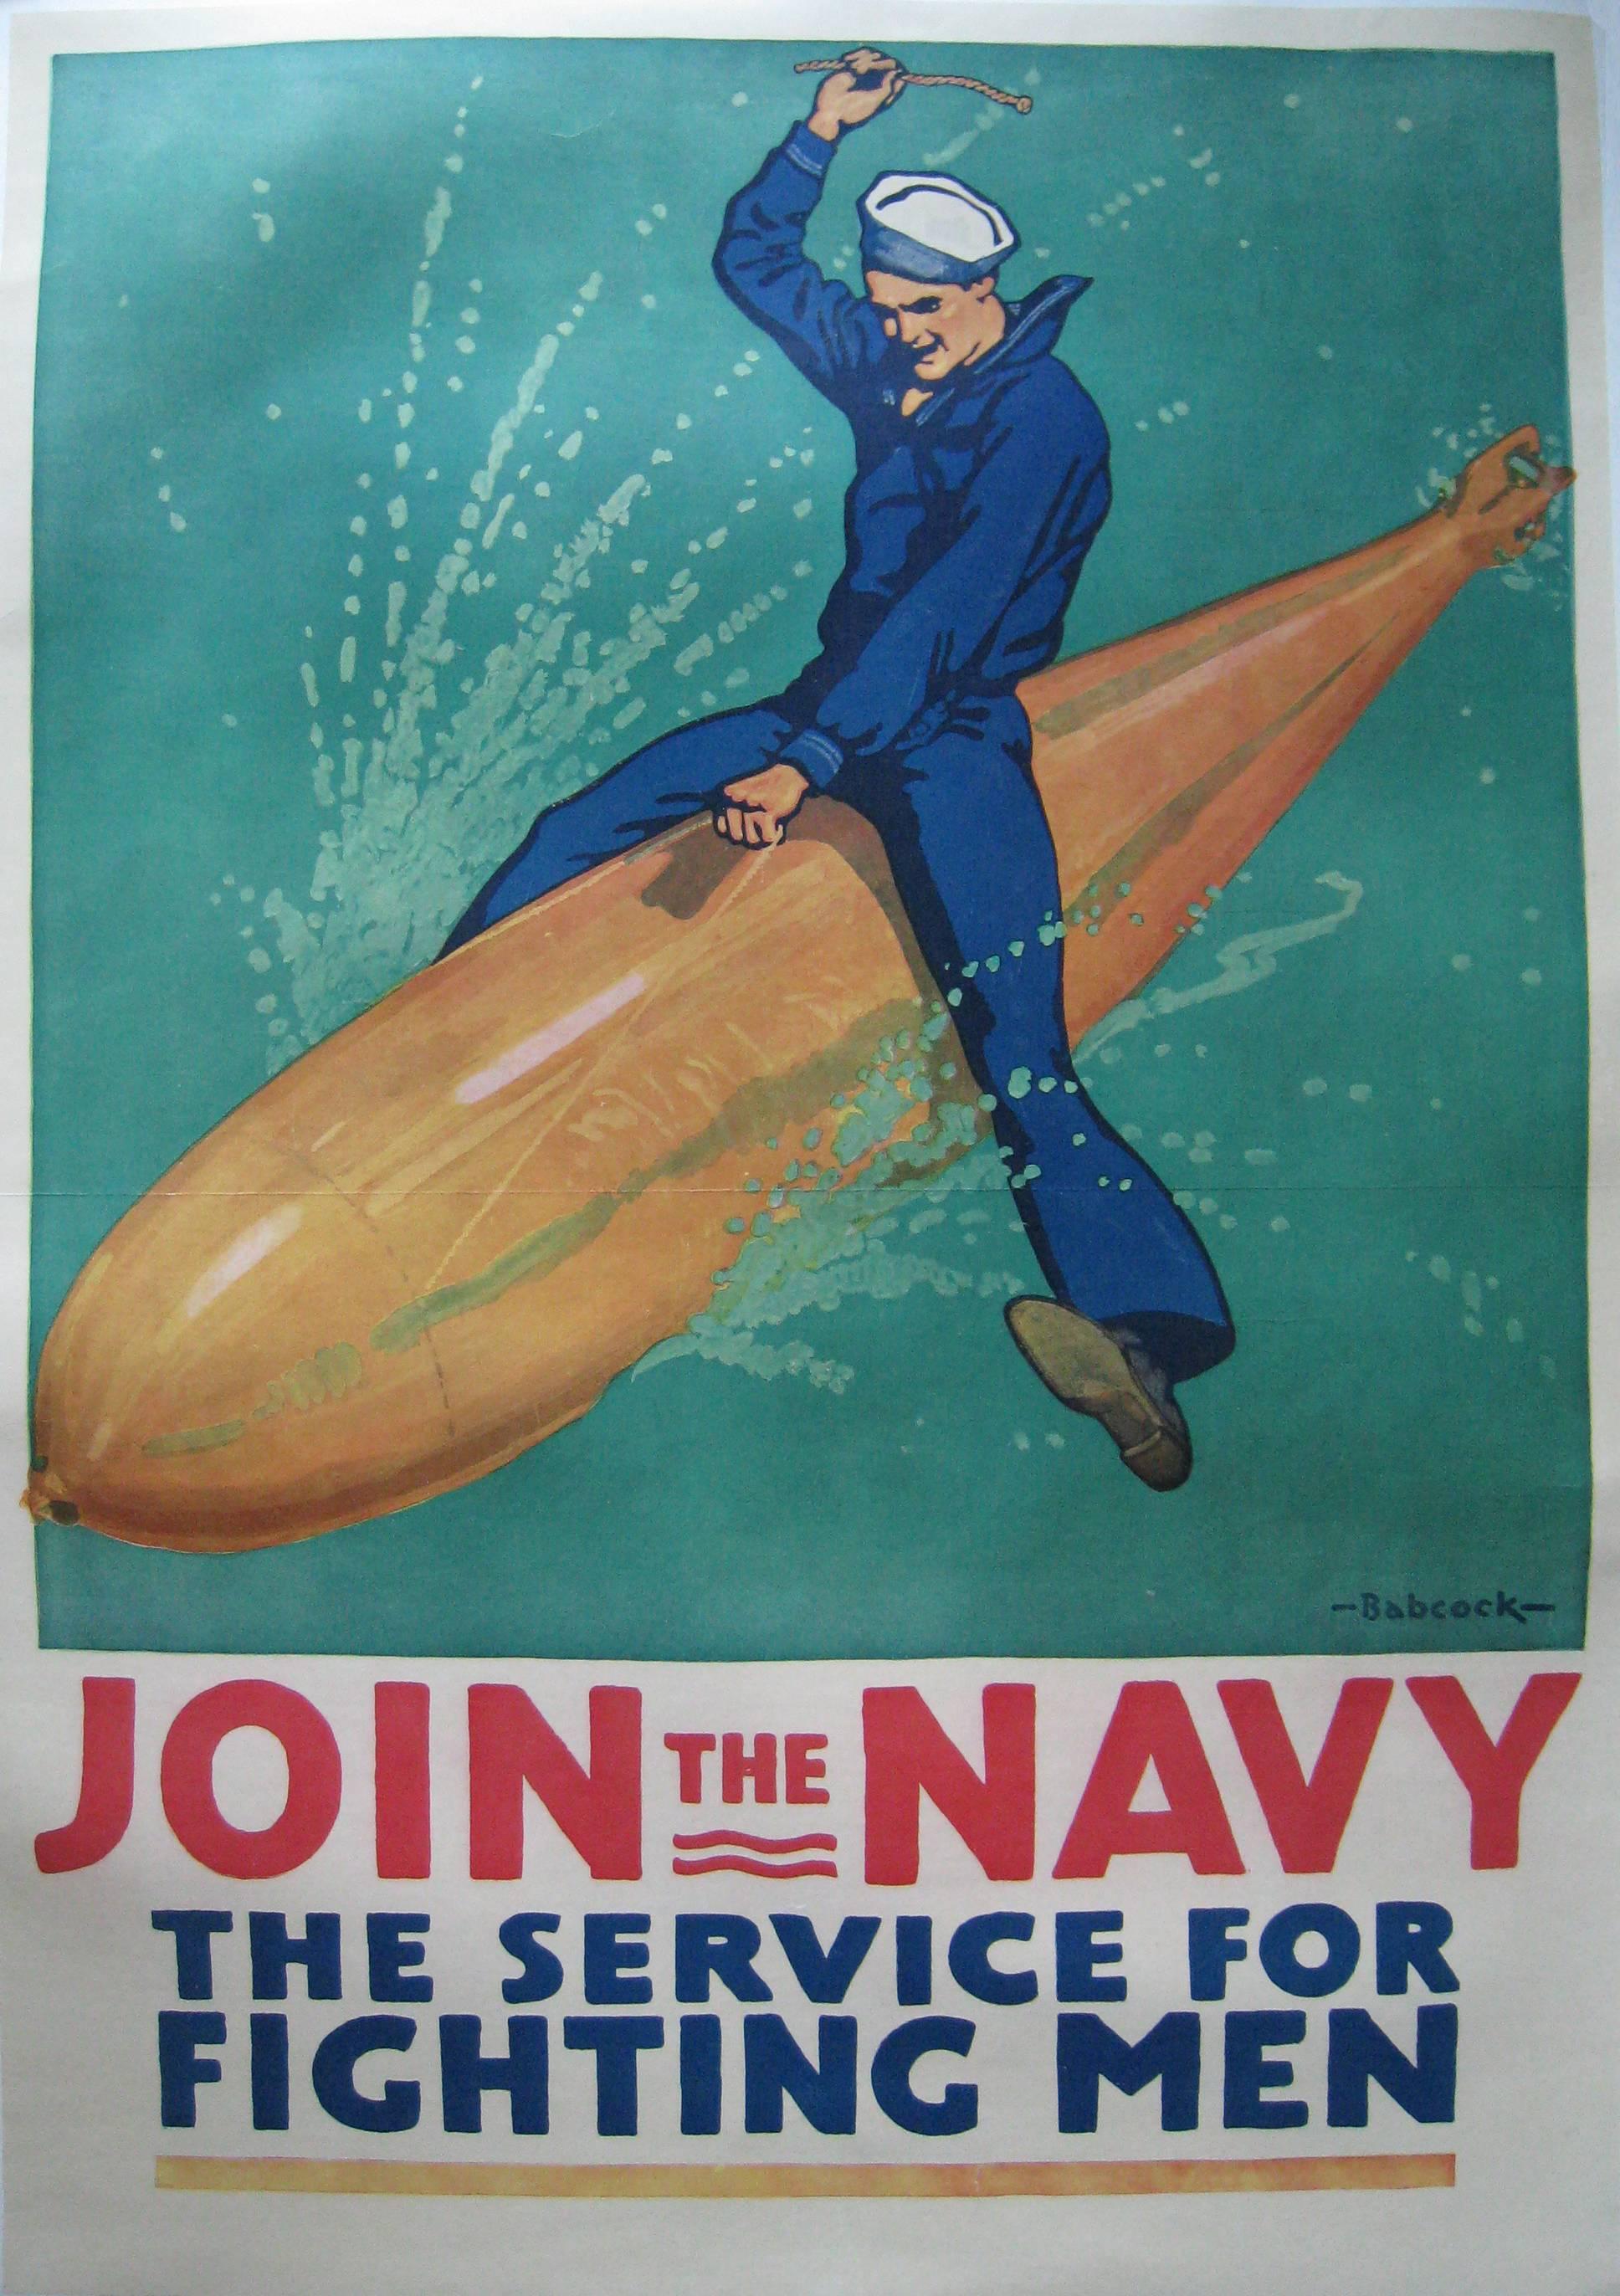 Babcock, Richard Fayerweather Figurative Print - Join the Navy The Service for Fighting Men 